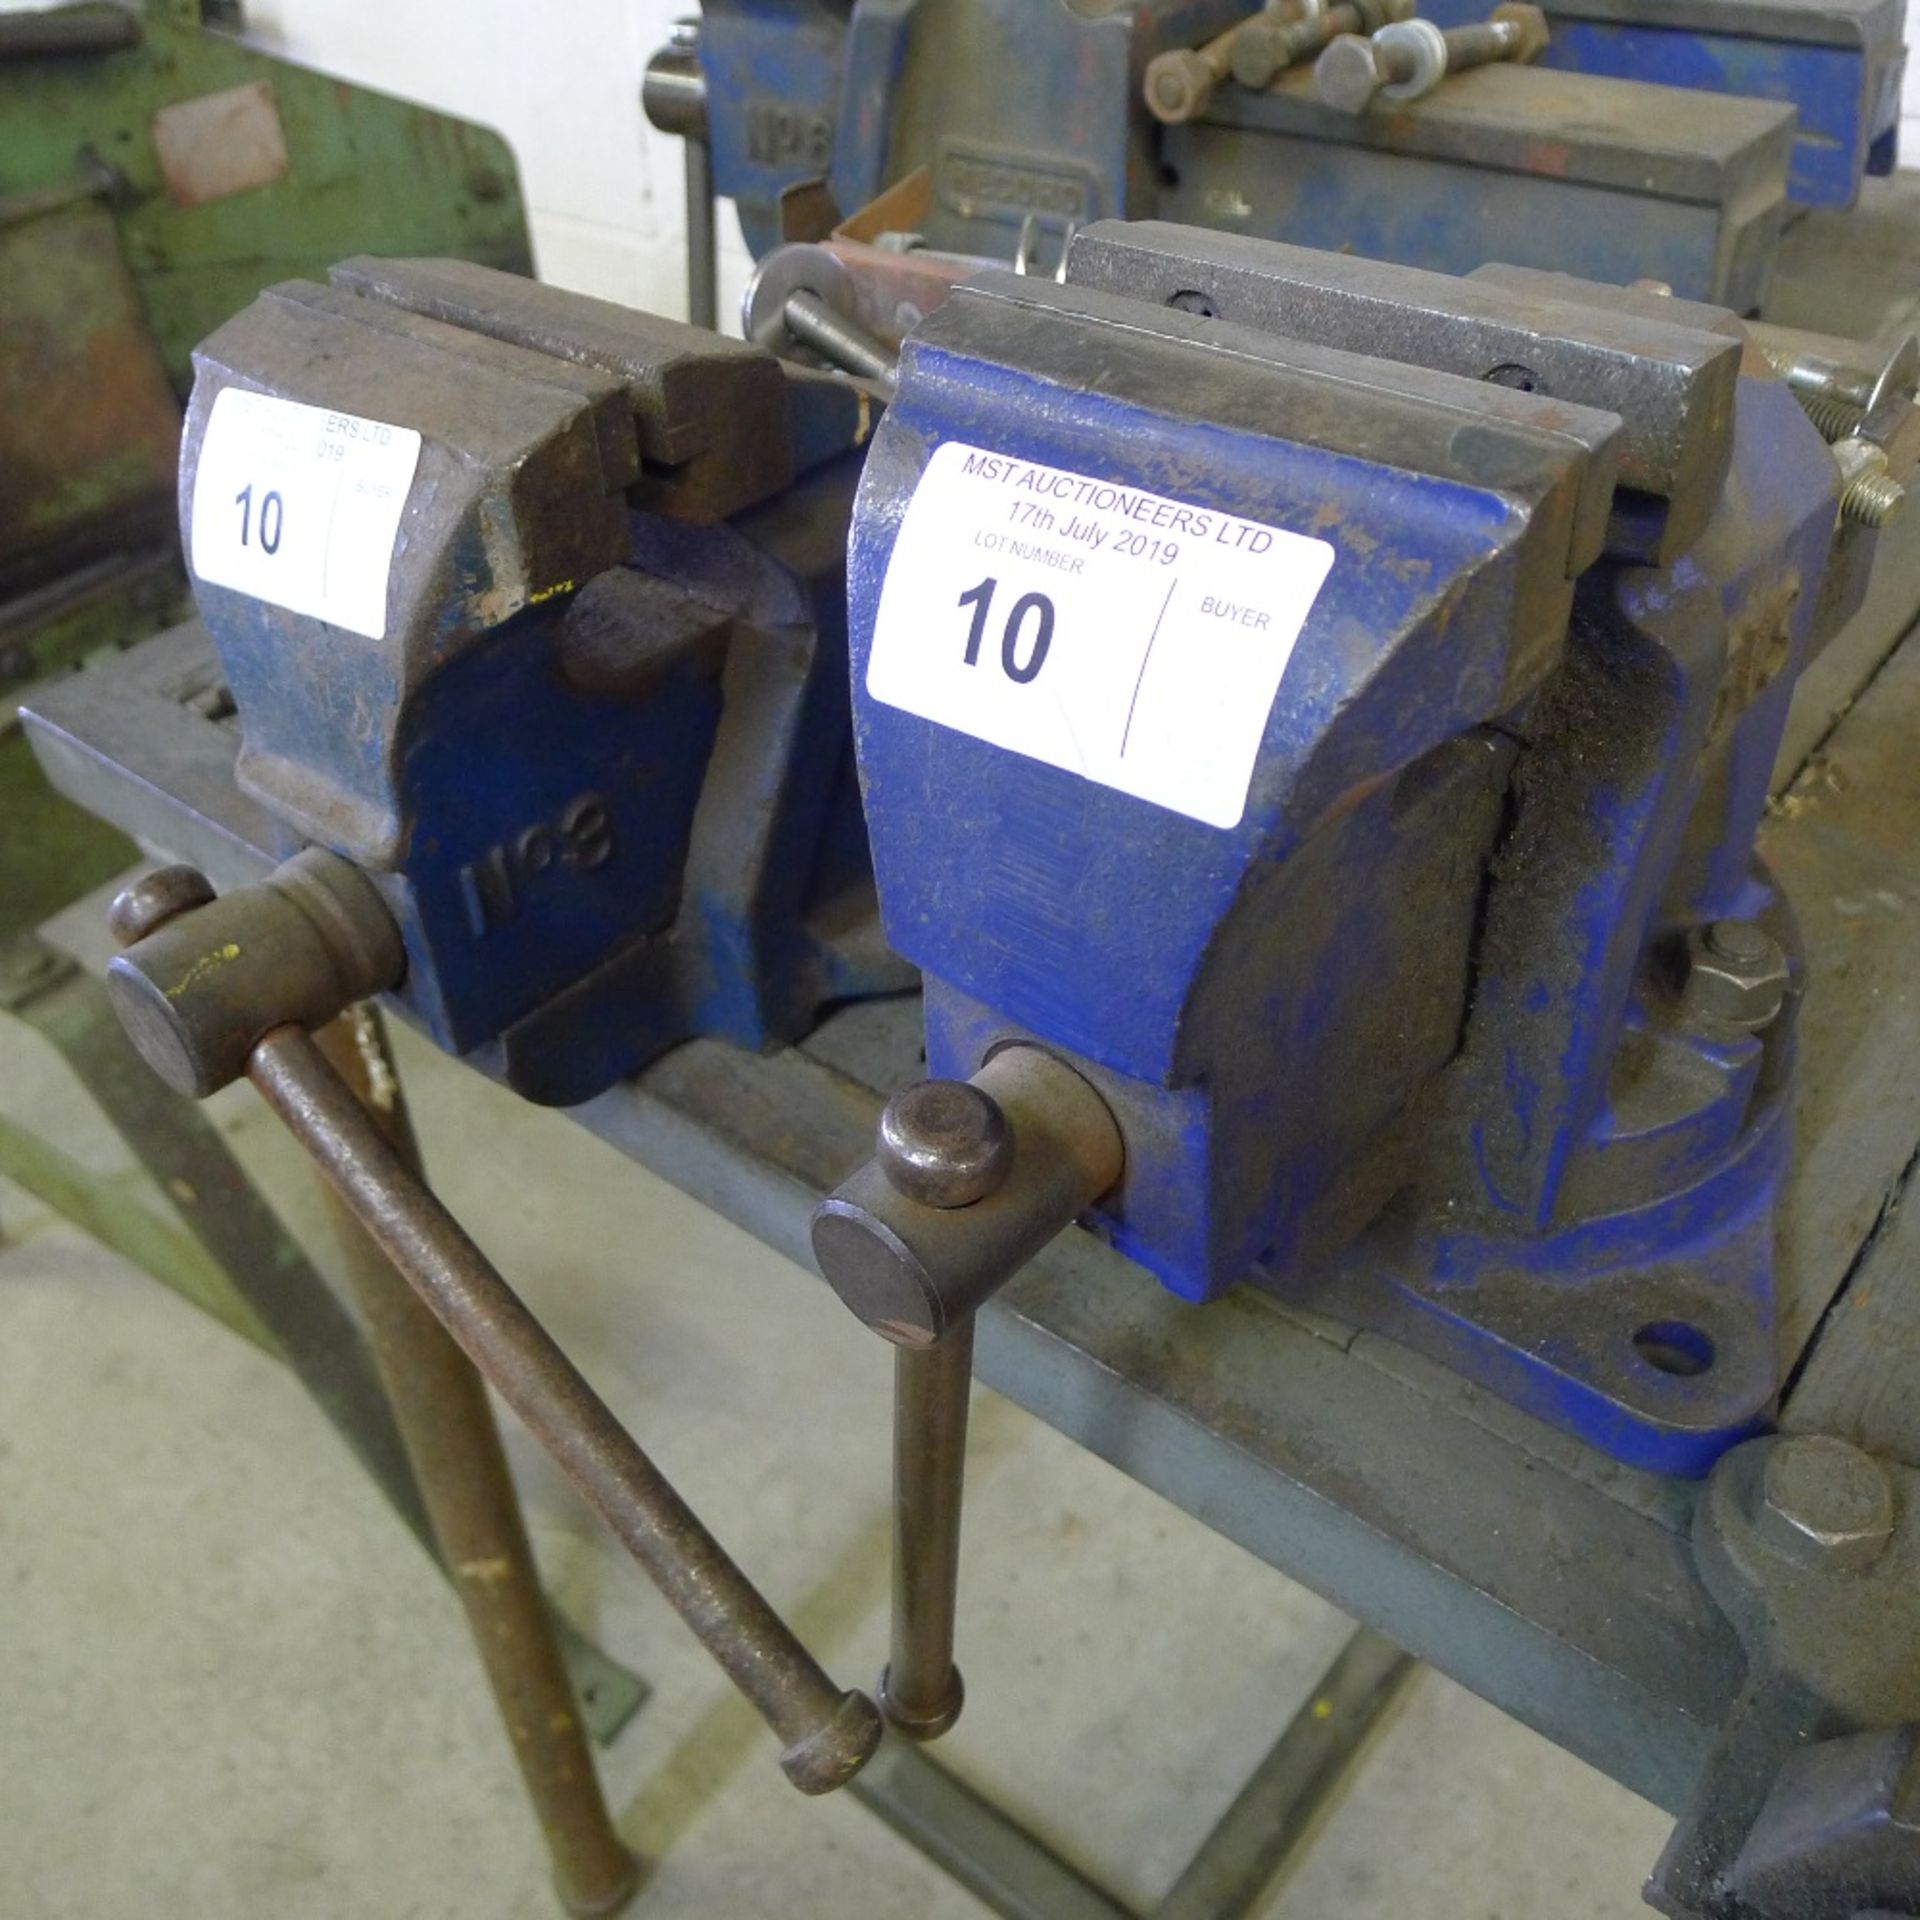 1 swivelling bench vice type 3VS and 1 other bench vice